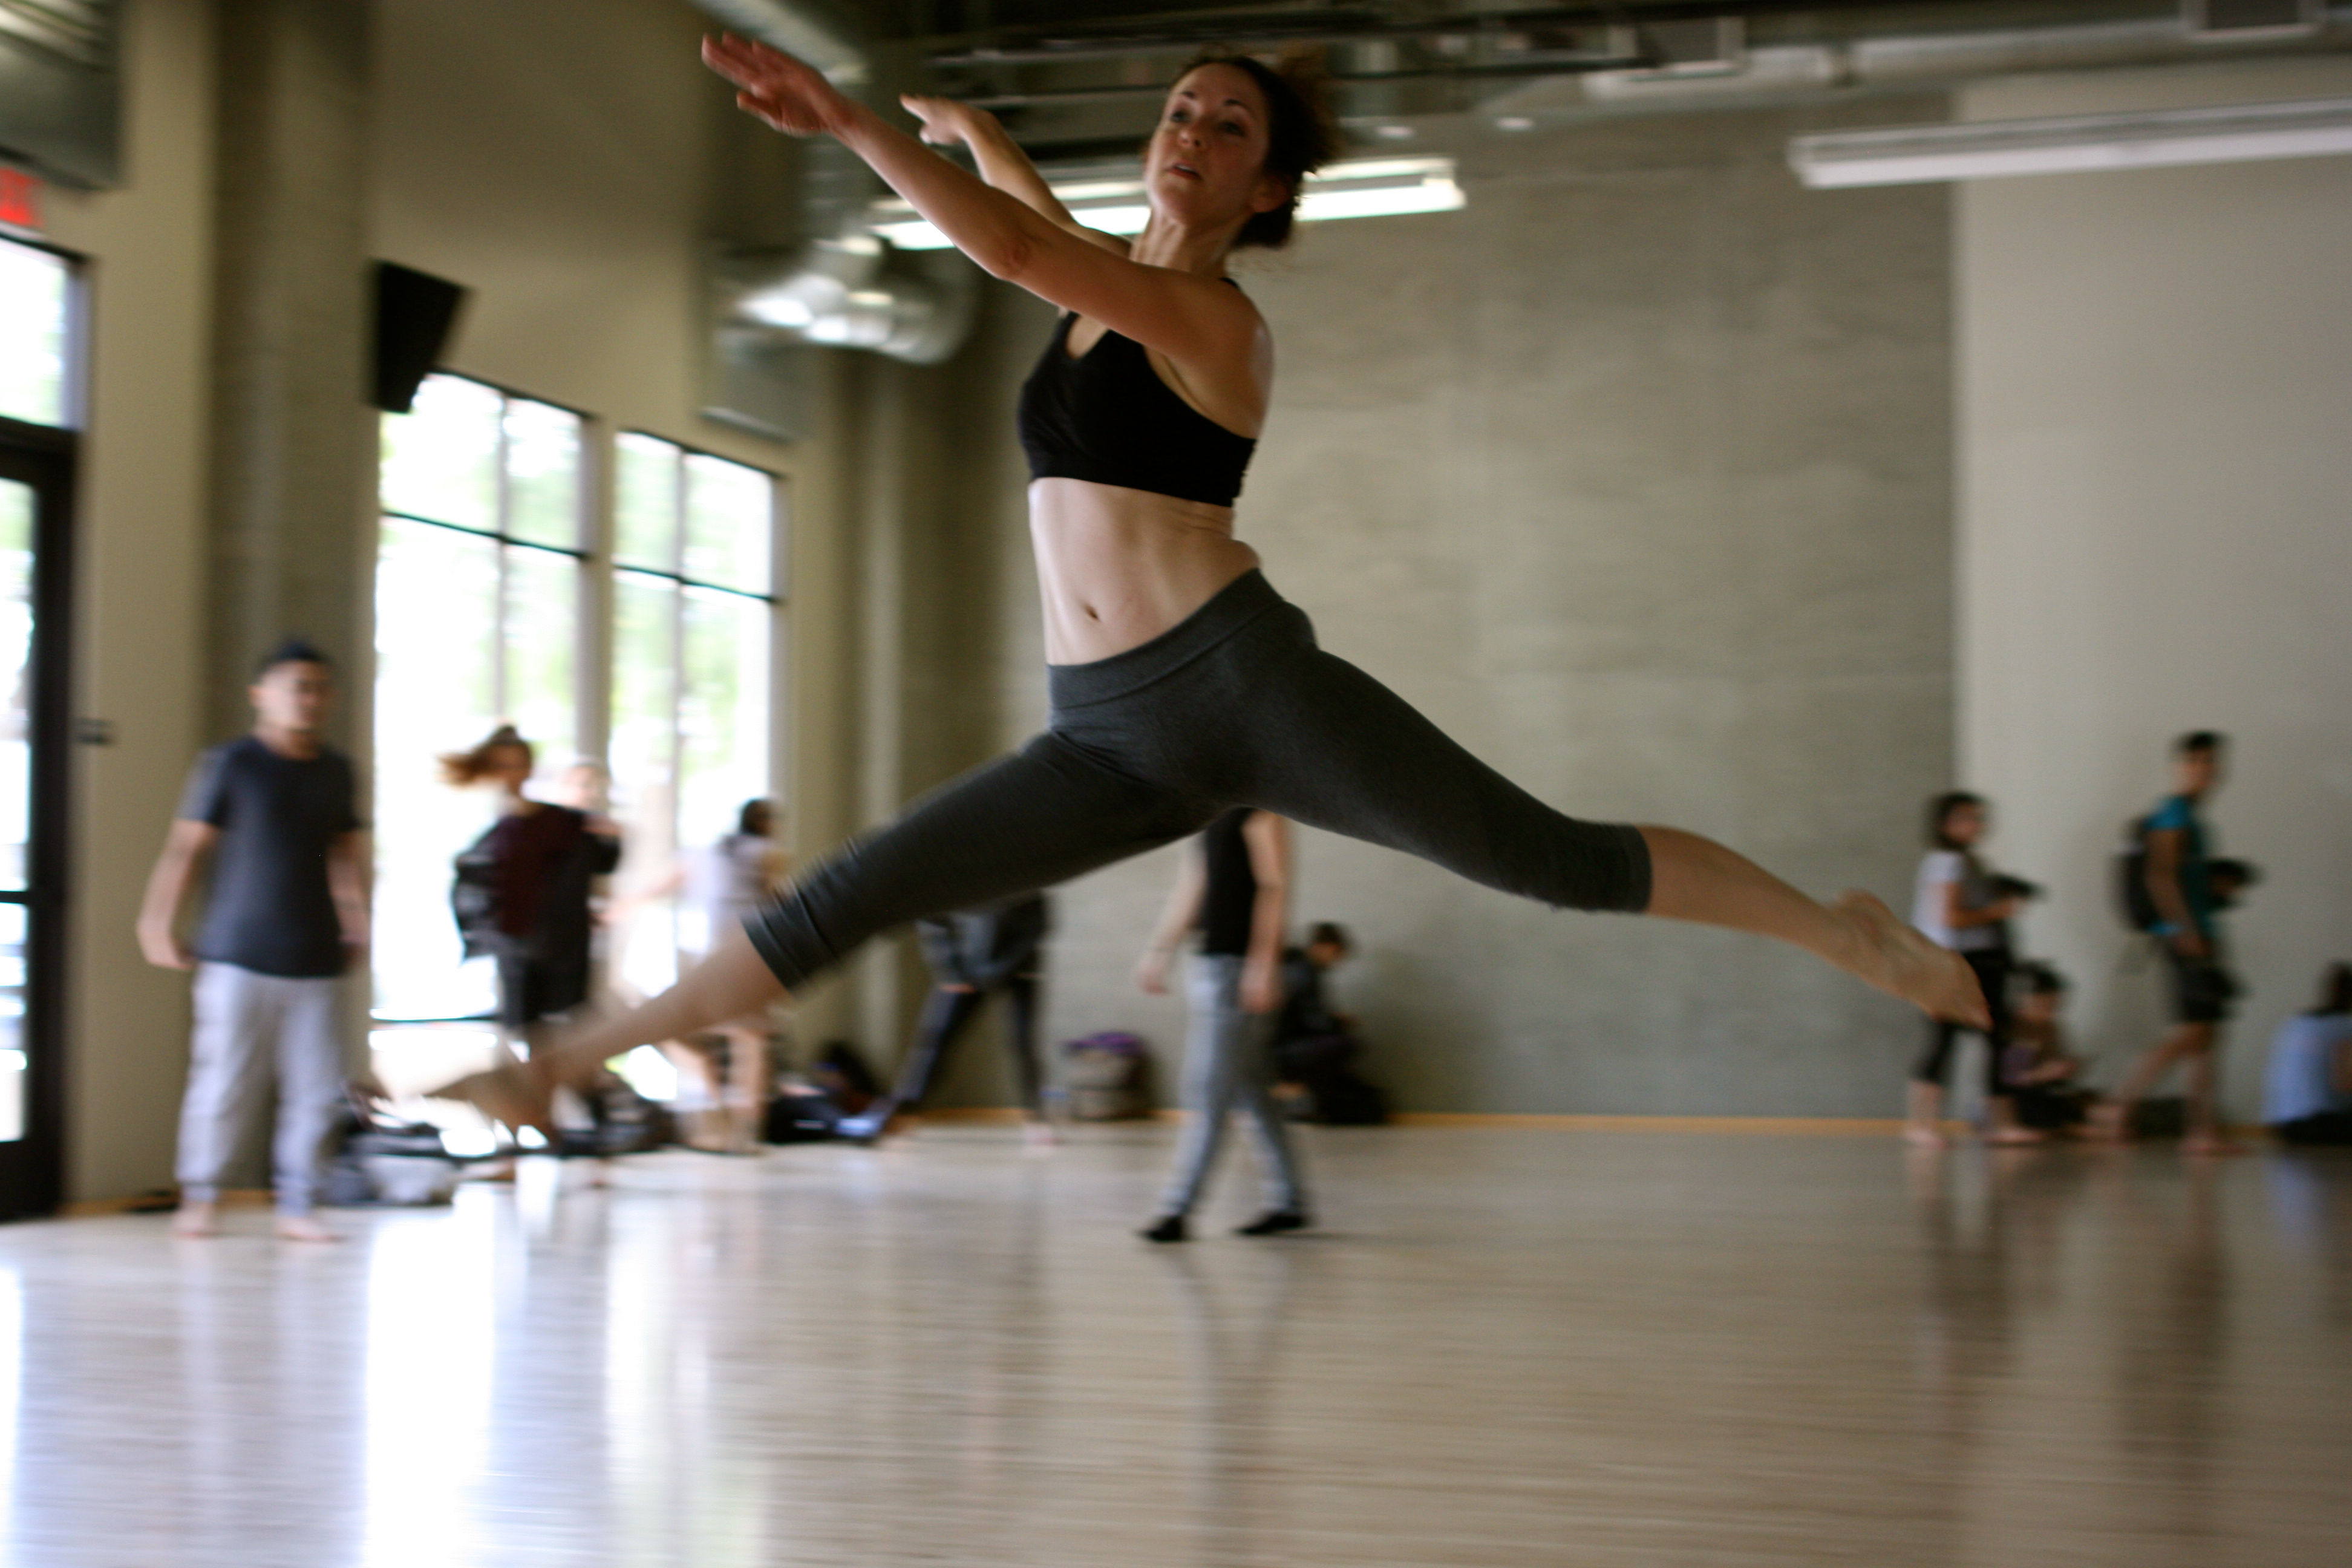 Dance class at The Edge Performing Arts Center in Hollywood